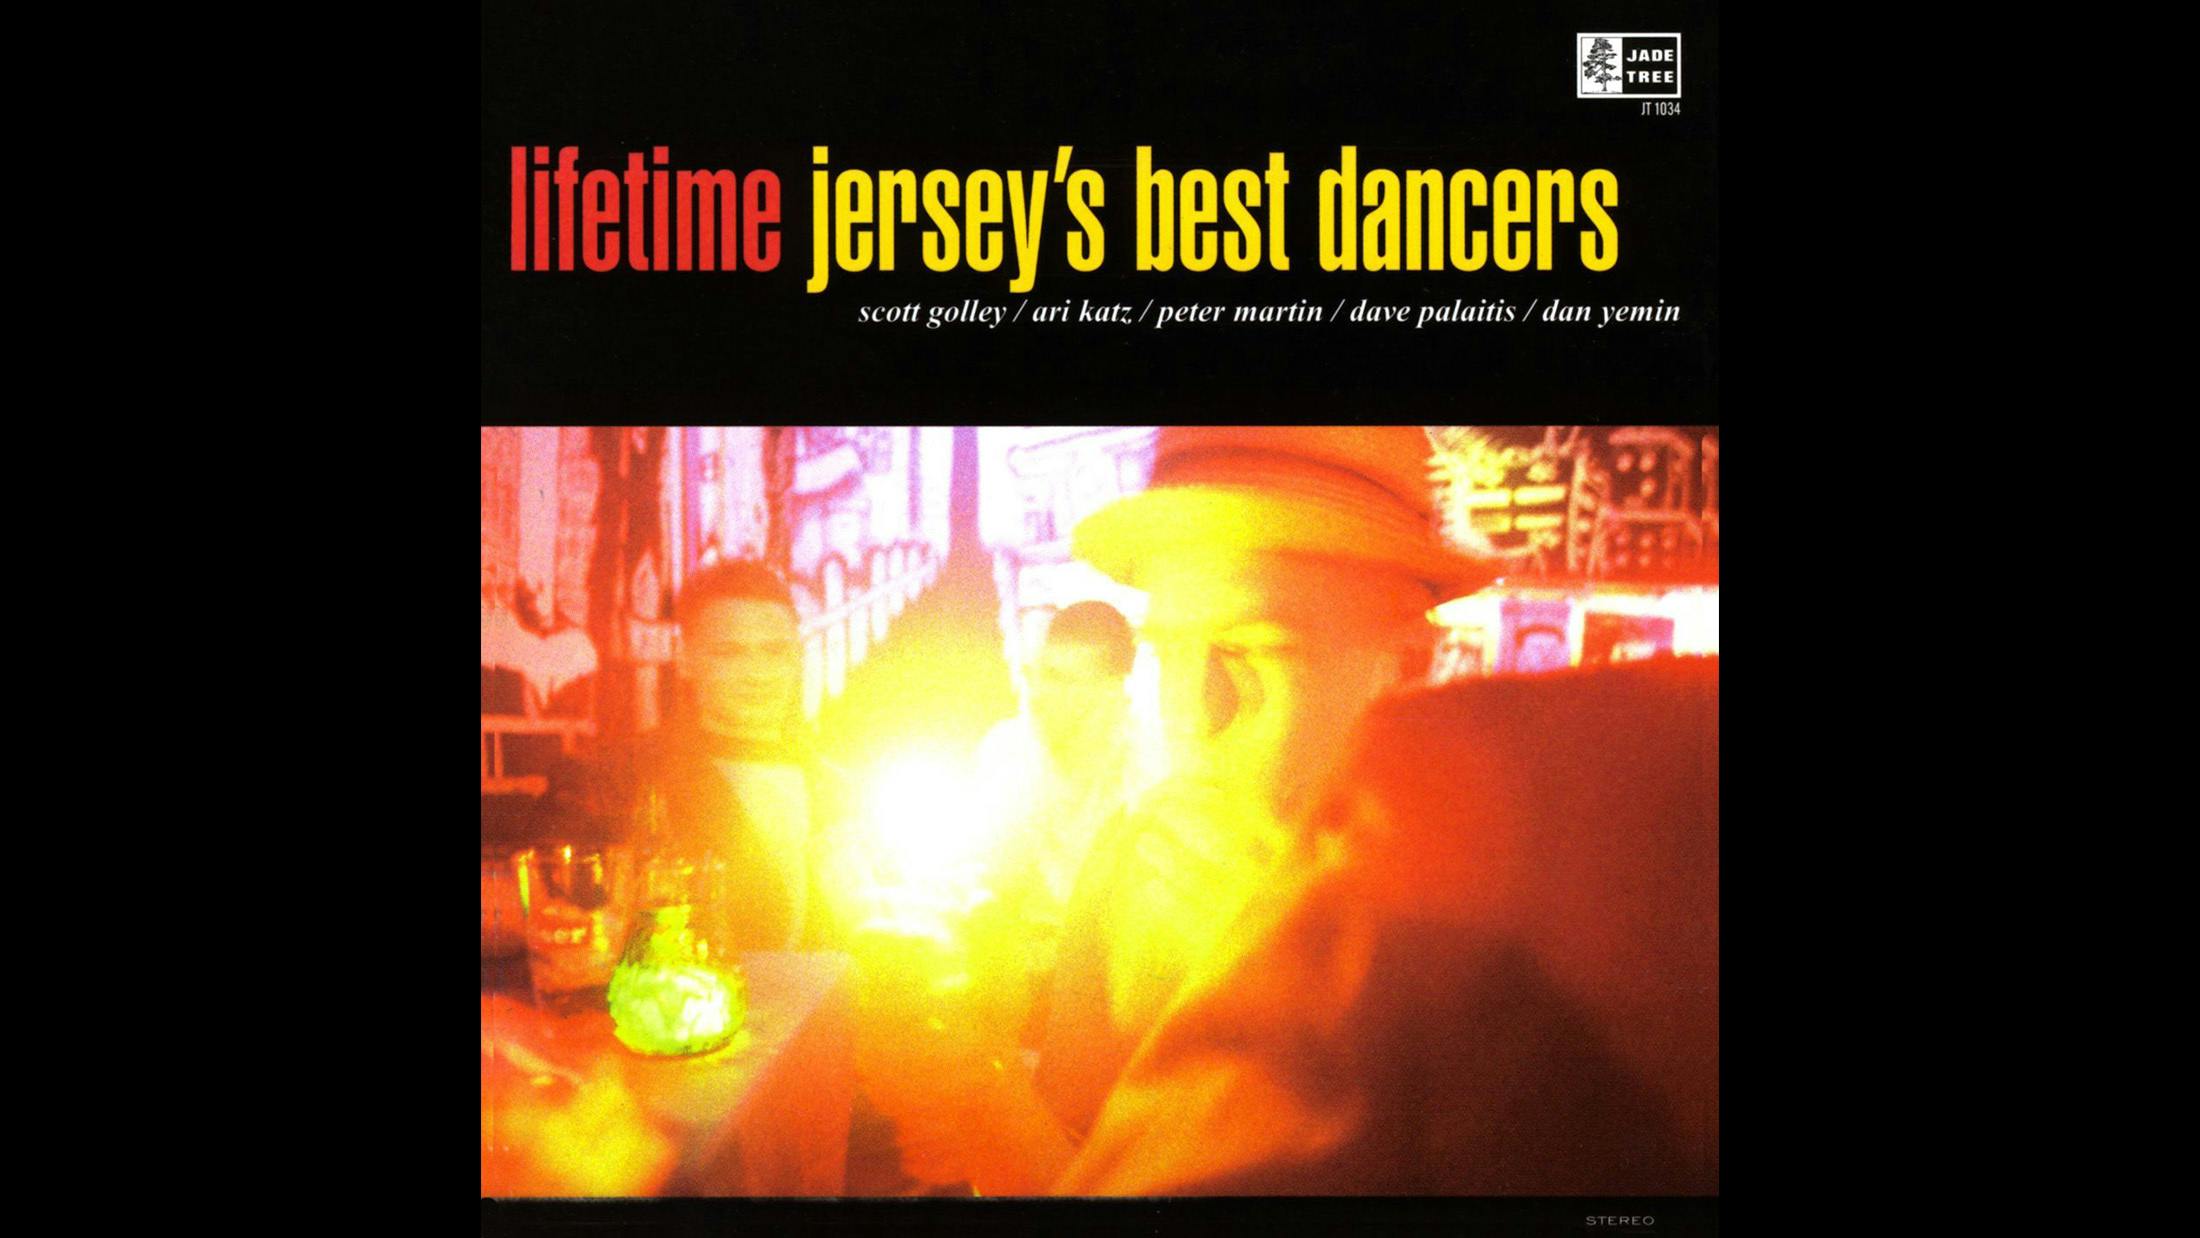 Packed with pace, punch and more wickedly danceable breaks than you can shake a stick at, the 12 tracks and 21 minutes of Jersey’s Best Dancers remain as potent 
now as it was when pop-punk heroes Lifetime recorded it in 1997. Seminal stuff from the original pop-punk band for hardcore kids.